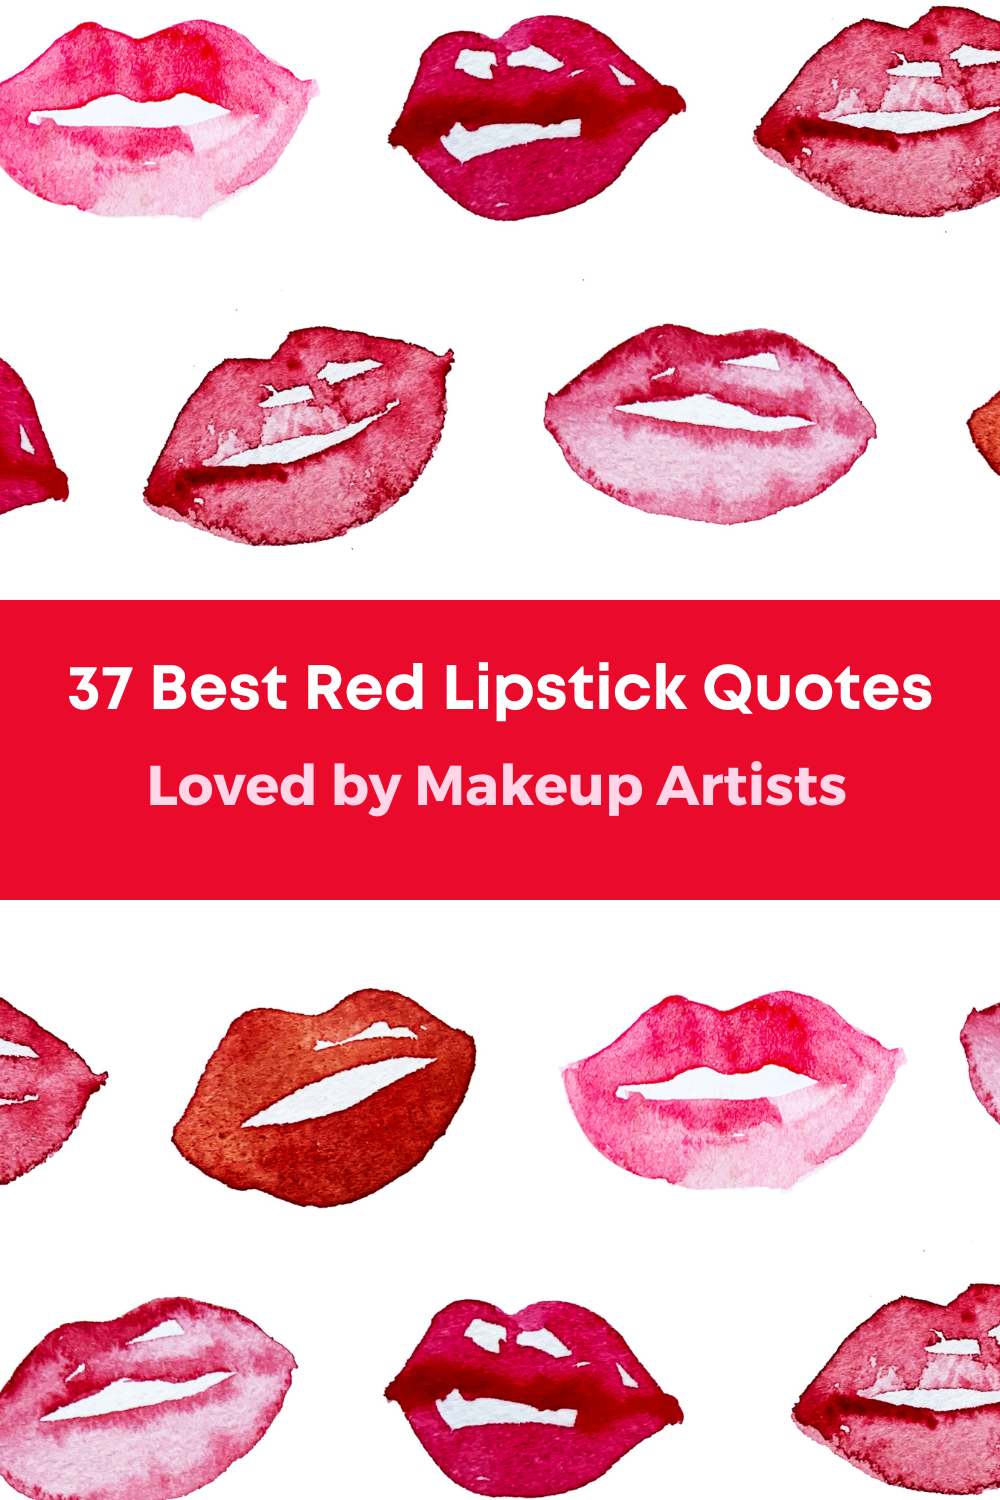 37 Red Lipstick Quotes Makeup Artists Love